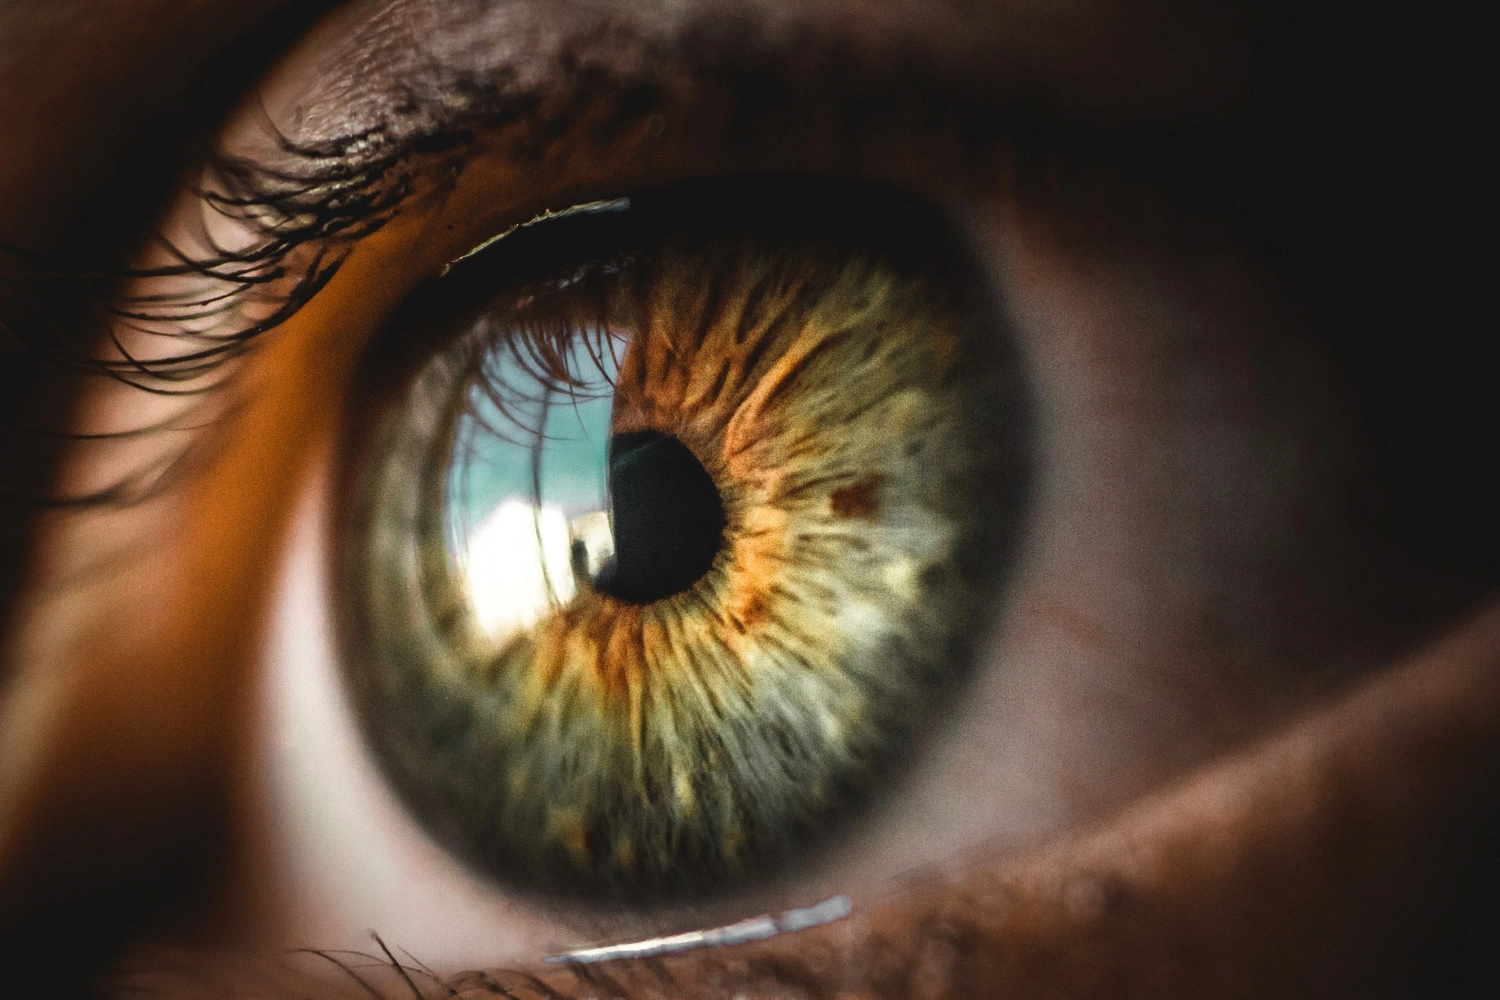 The anterior chamber of the eye can contribute to medical research